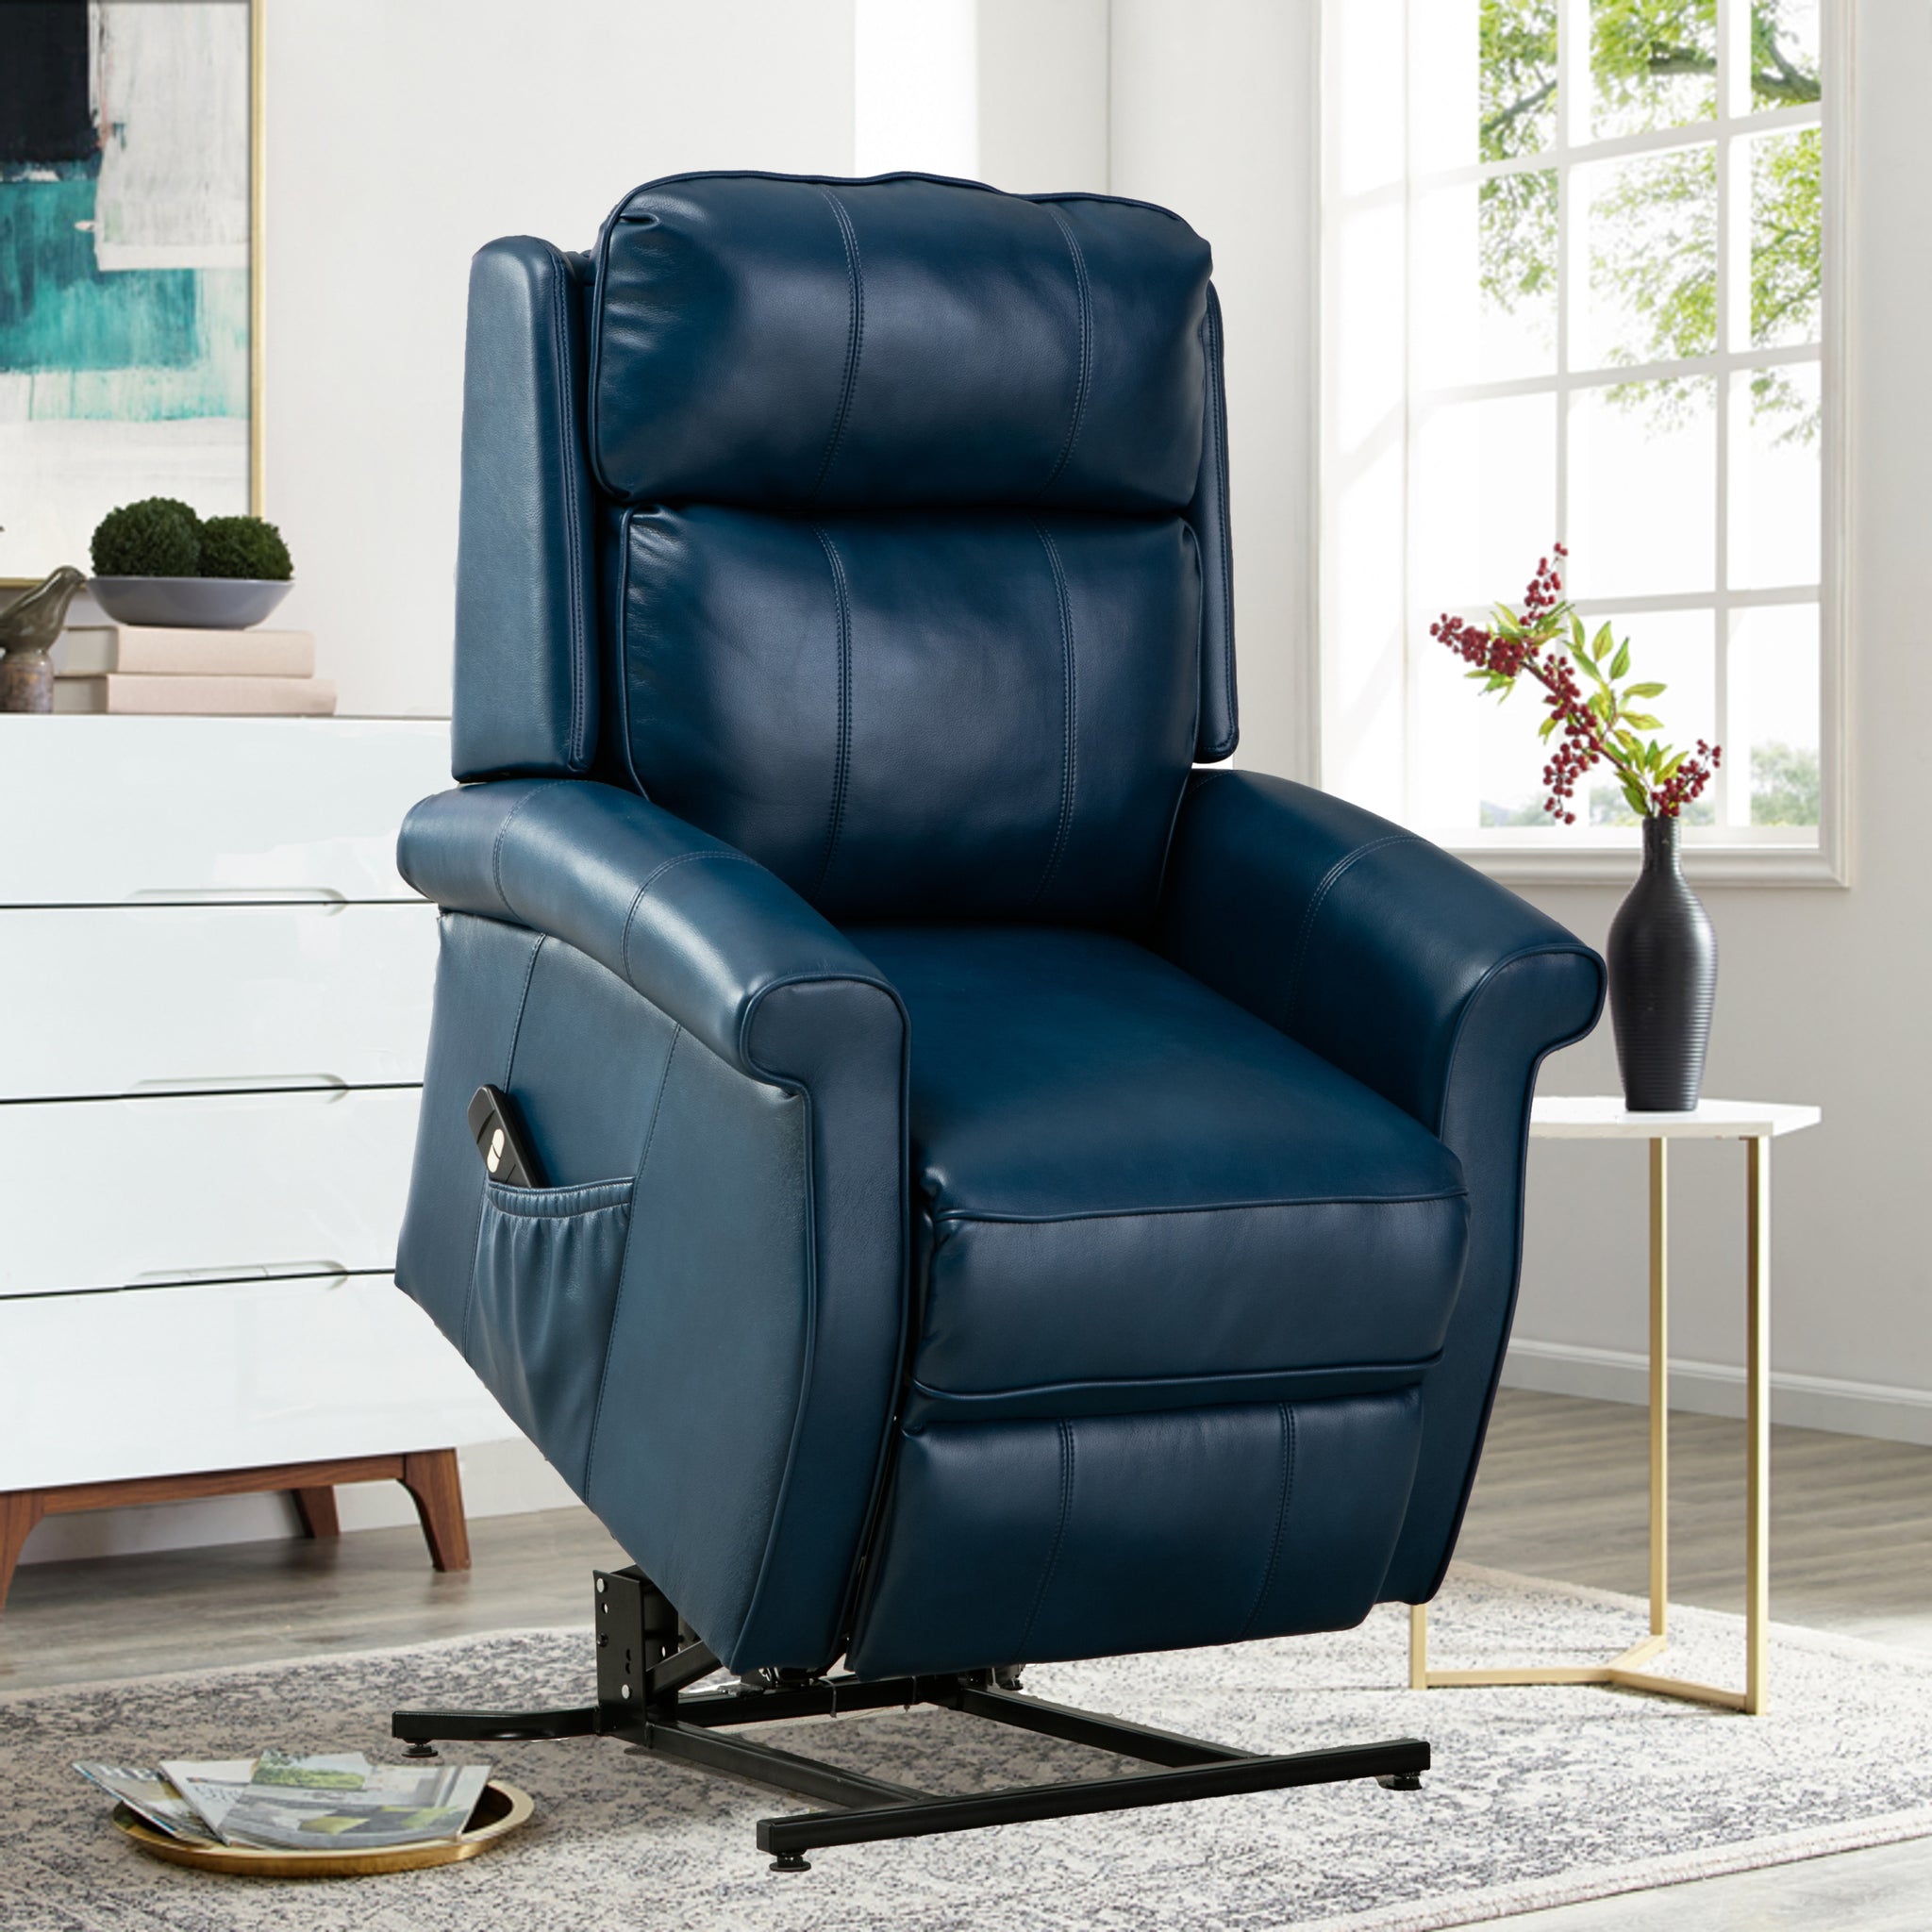 Landis Navy Blue Traditional Lift Chair